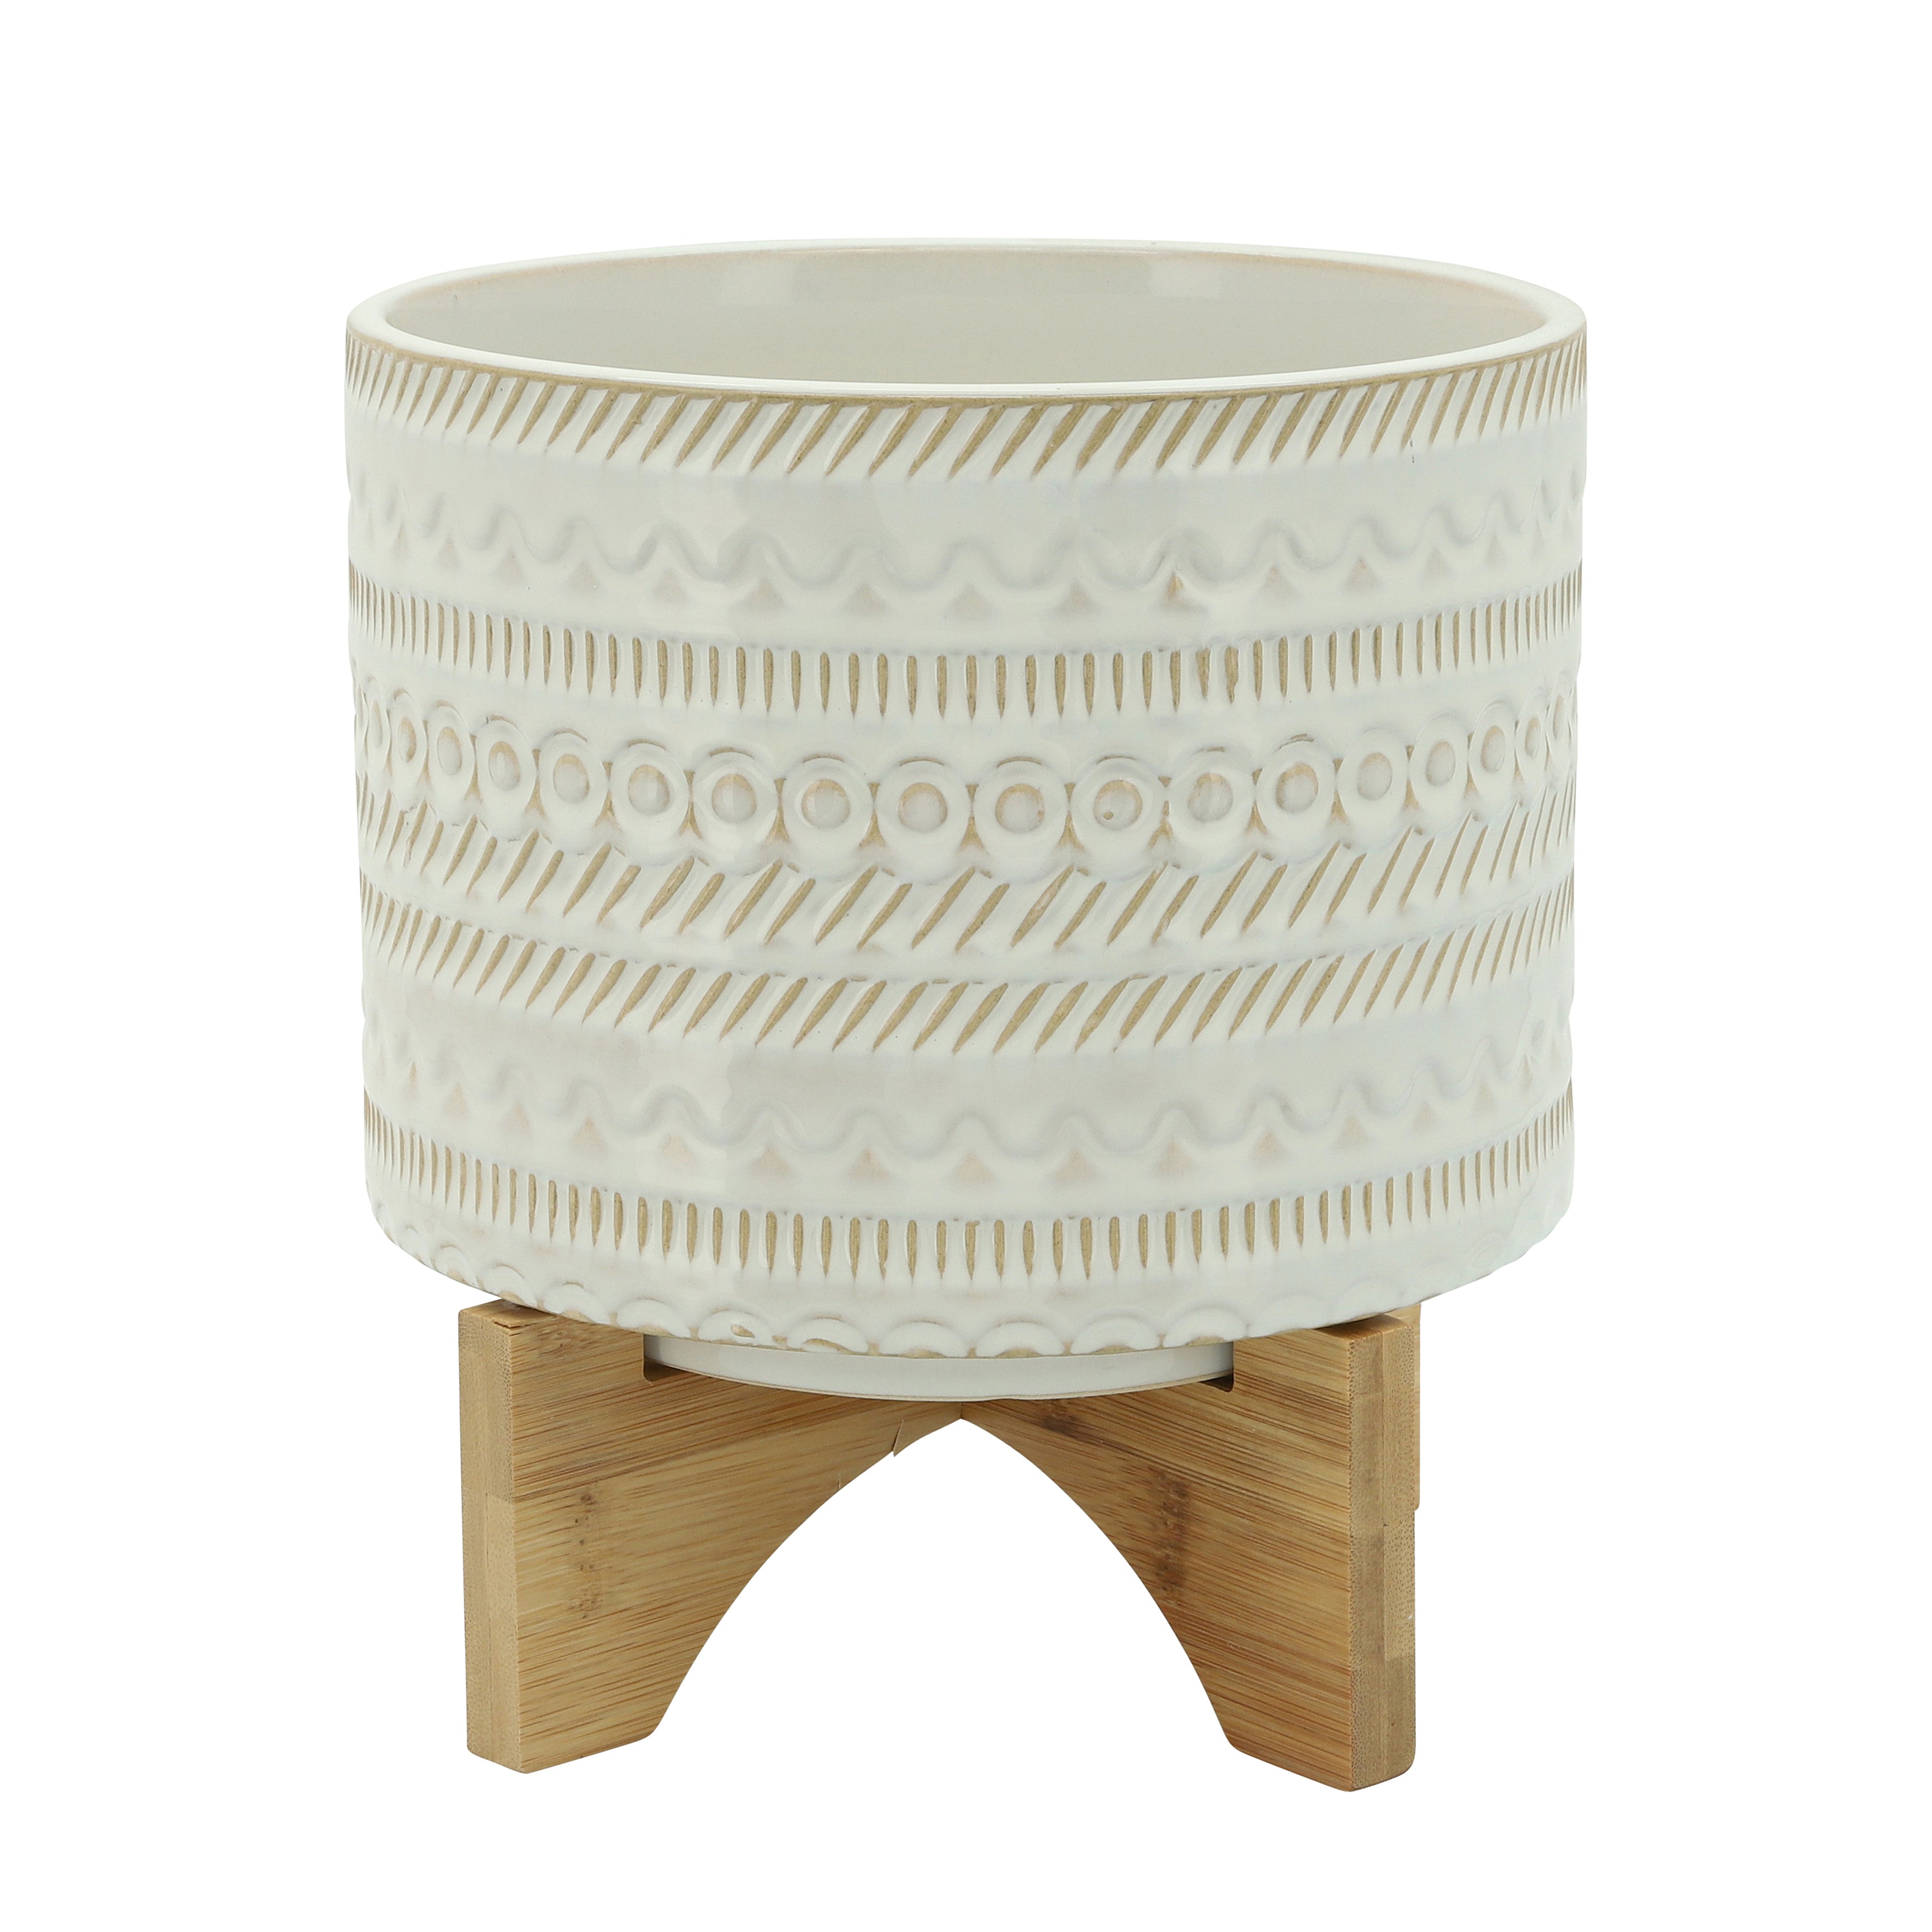 8" Tribal Planter with Wood Stand, Beige, Planters